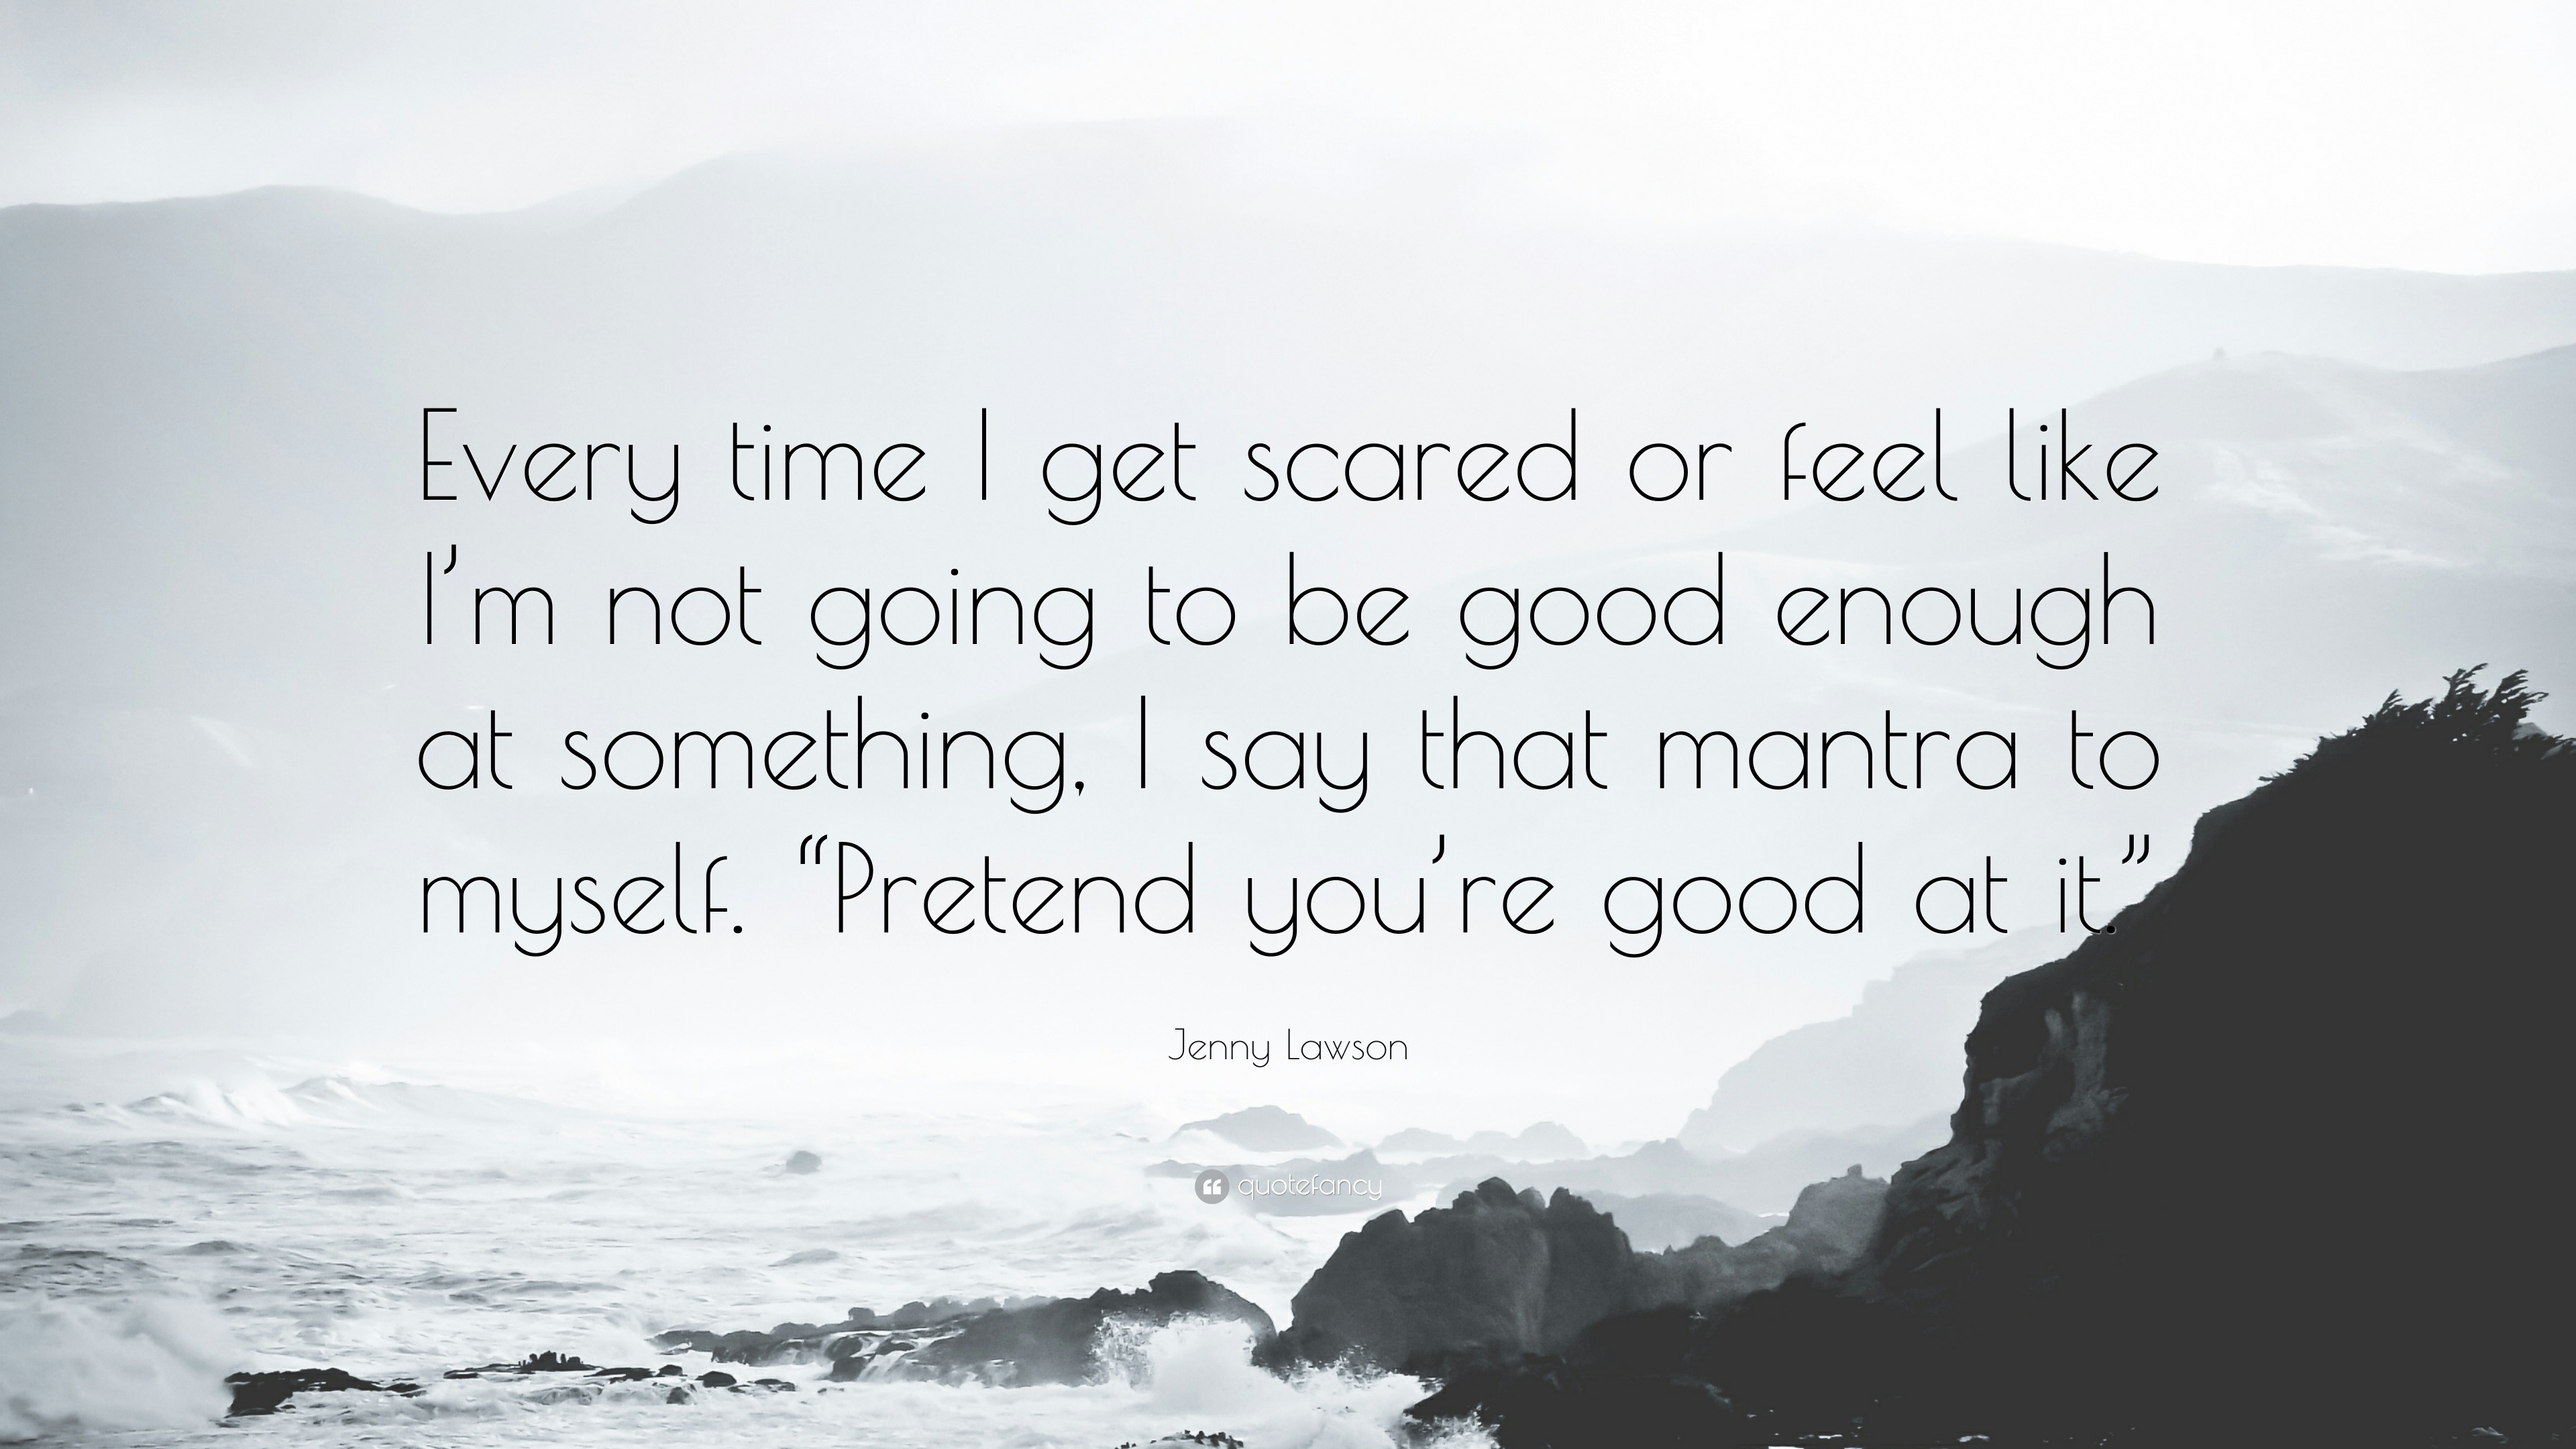 Jenny Lawson Quote Every Time I Get Scared Or Feel Like I M Not Going To Be Good Enough At Something I Say That Mantra To Myself Pretend